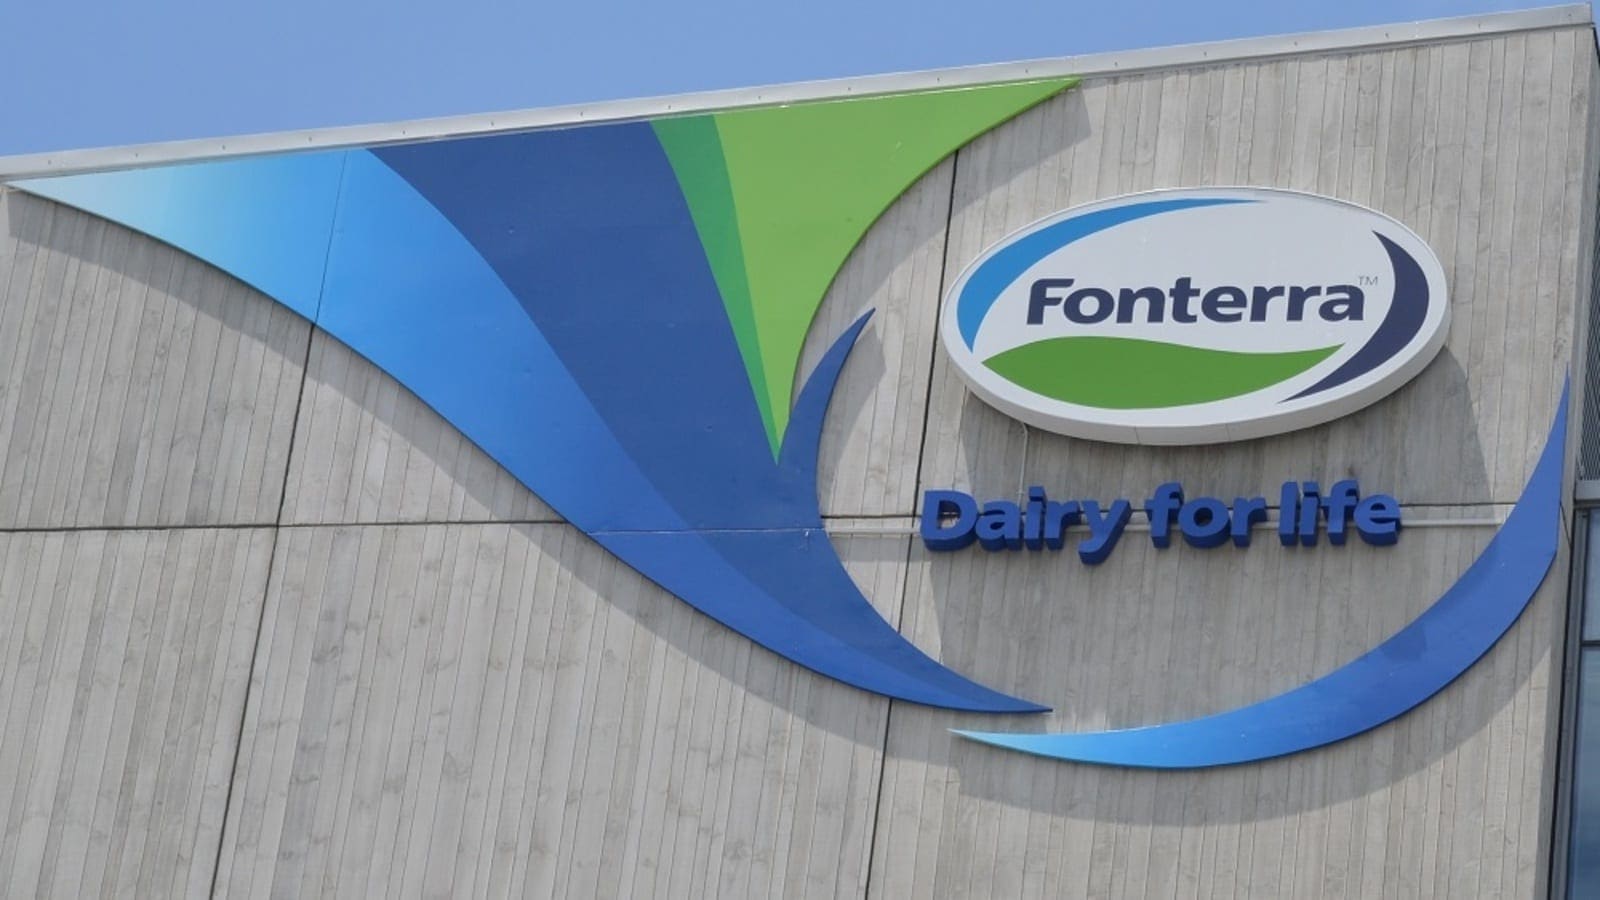 Fonterra posts US$422m profit after tax, to review Chile, Australian operations inline with strategy to prioritize New Zealand milk